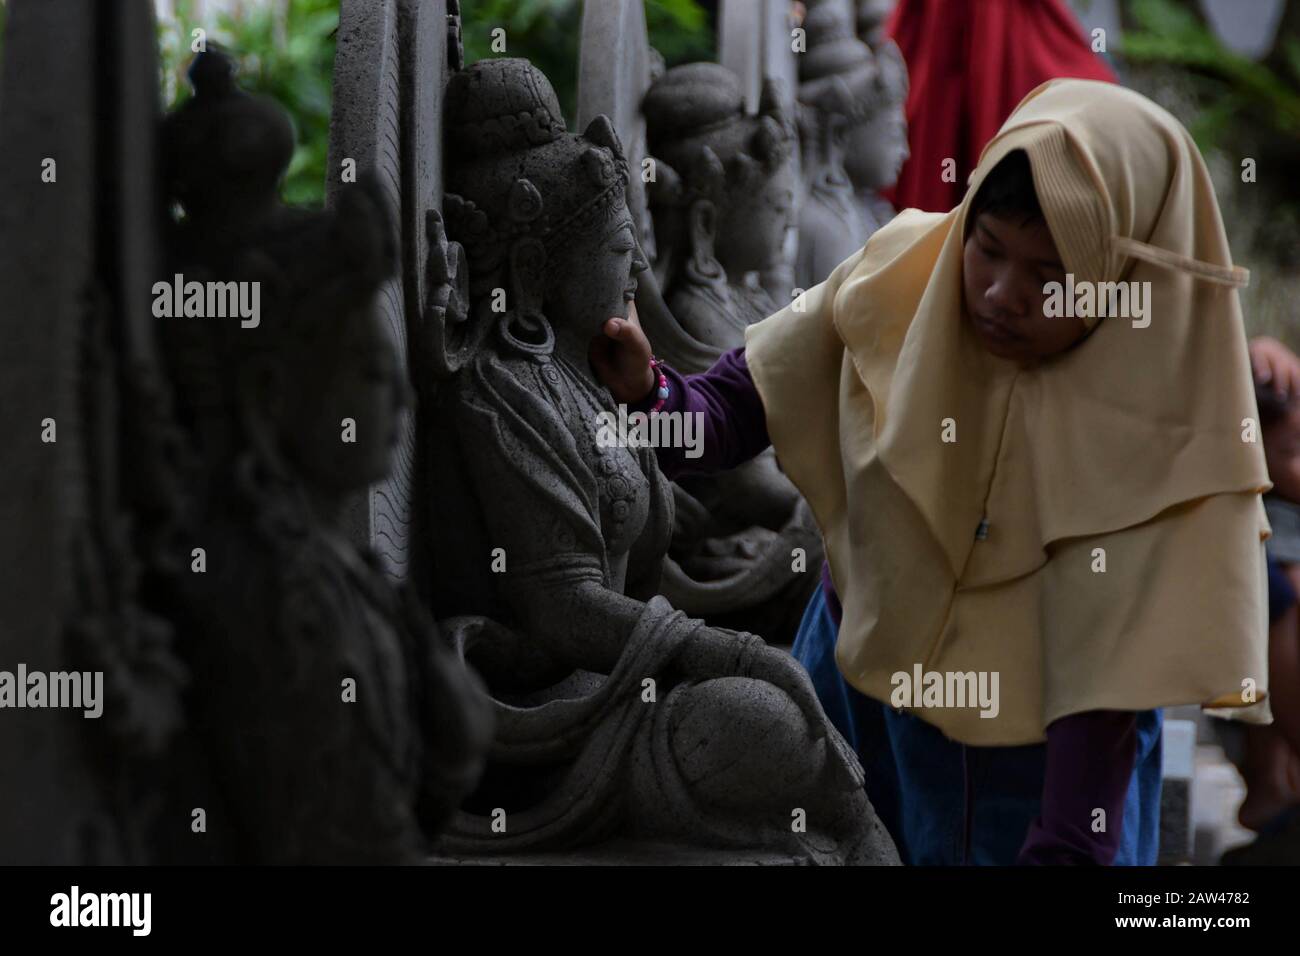 Local tourists visit the sleeping Buddha statue at Maha Vihara Mojopahit, Trowulan, Mojokerto, East Java, Indonesia. on March 7, 2019. The statue is 22 meters long, 6 meters wide and 4.5 meters high and is claimed to be the third largest Sleeping Buddha statue in Asia and is one of the tourist destinations. Stock Photo